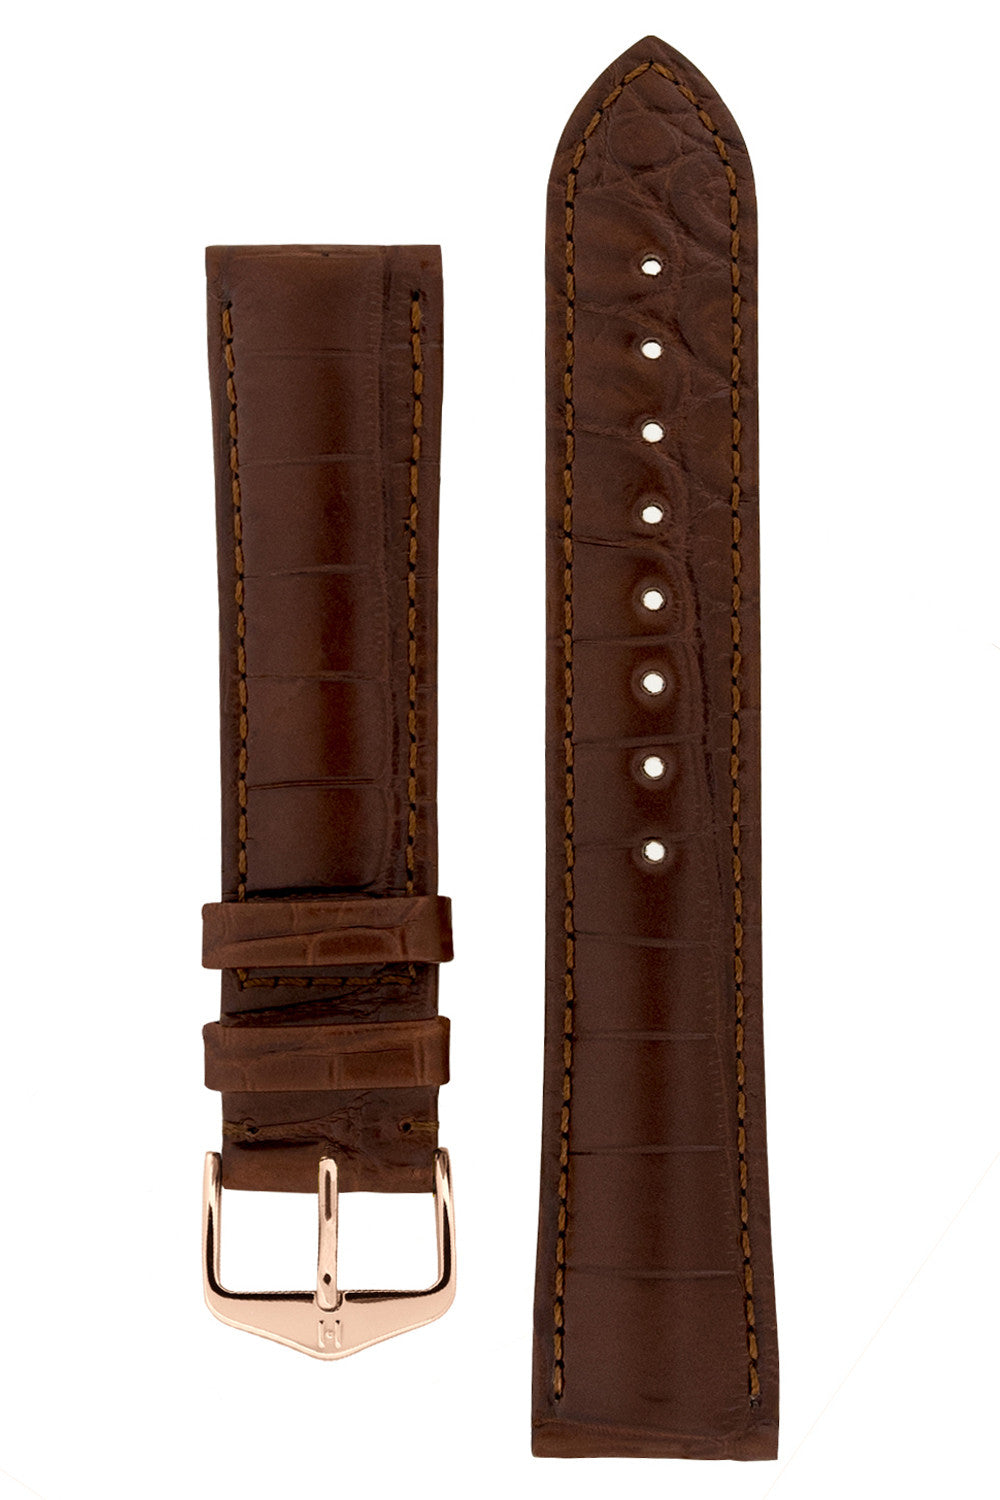 Hirsch BARON Nile Crocodile Leather Strap in BROWN | WatchObsession